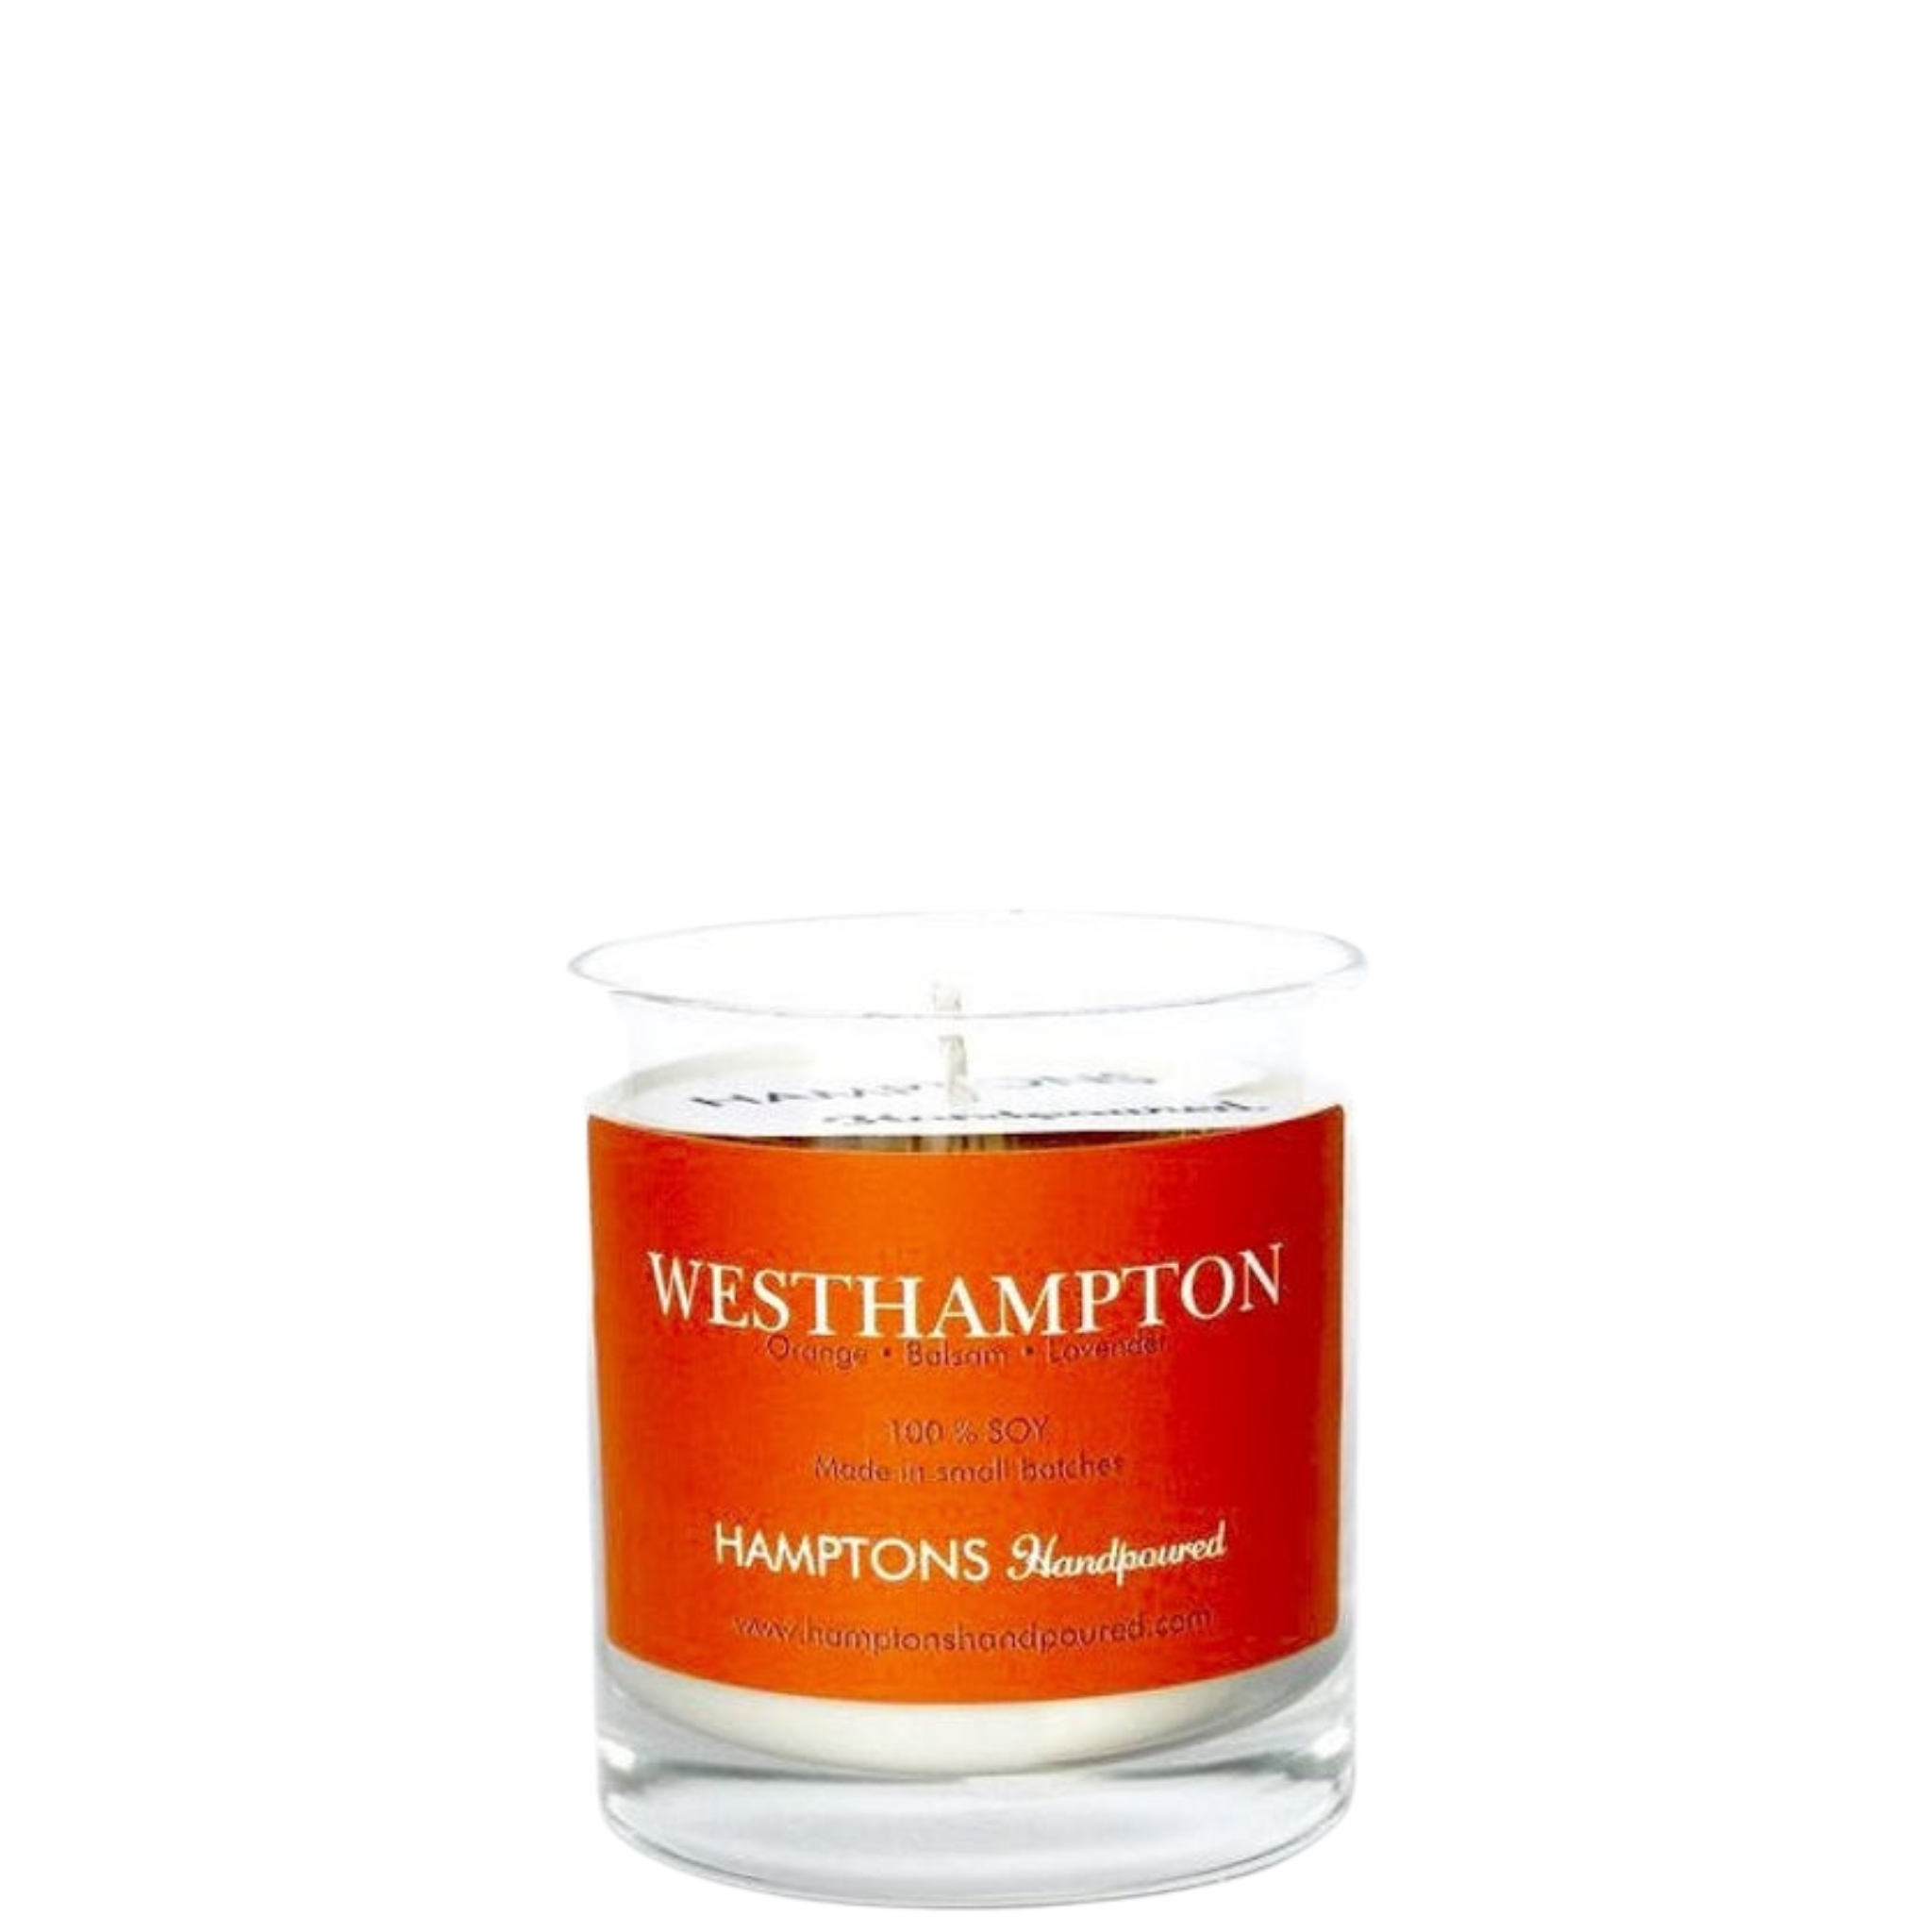 Hamptons Hand Poured Soy Candles